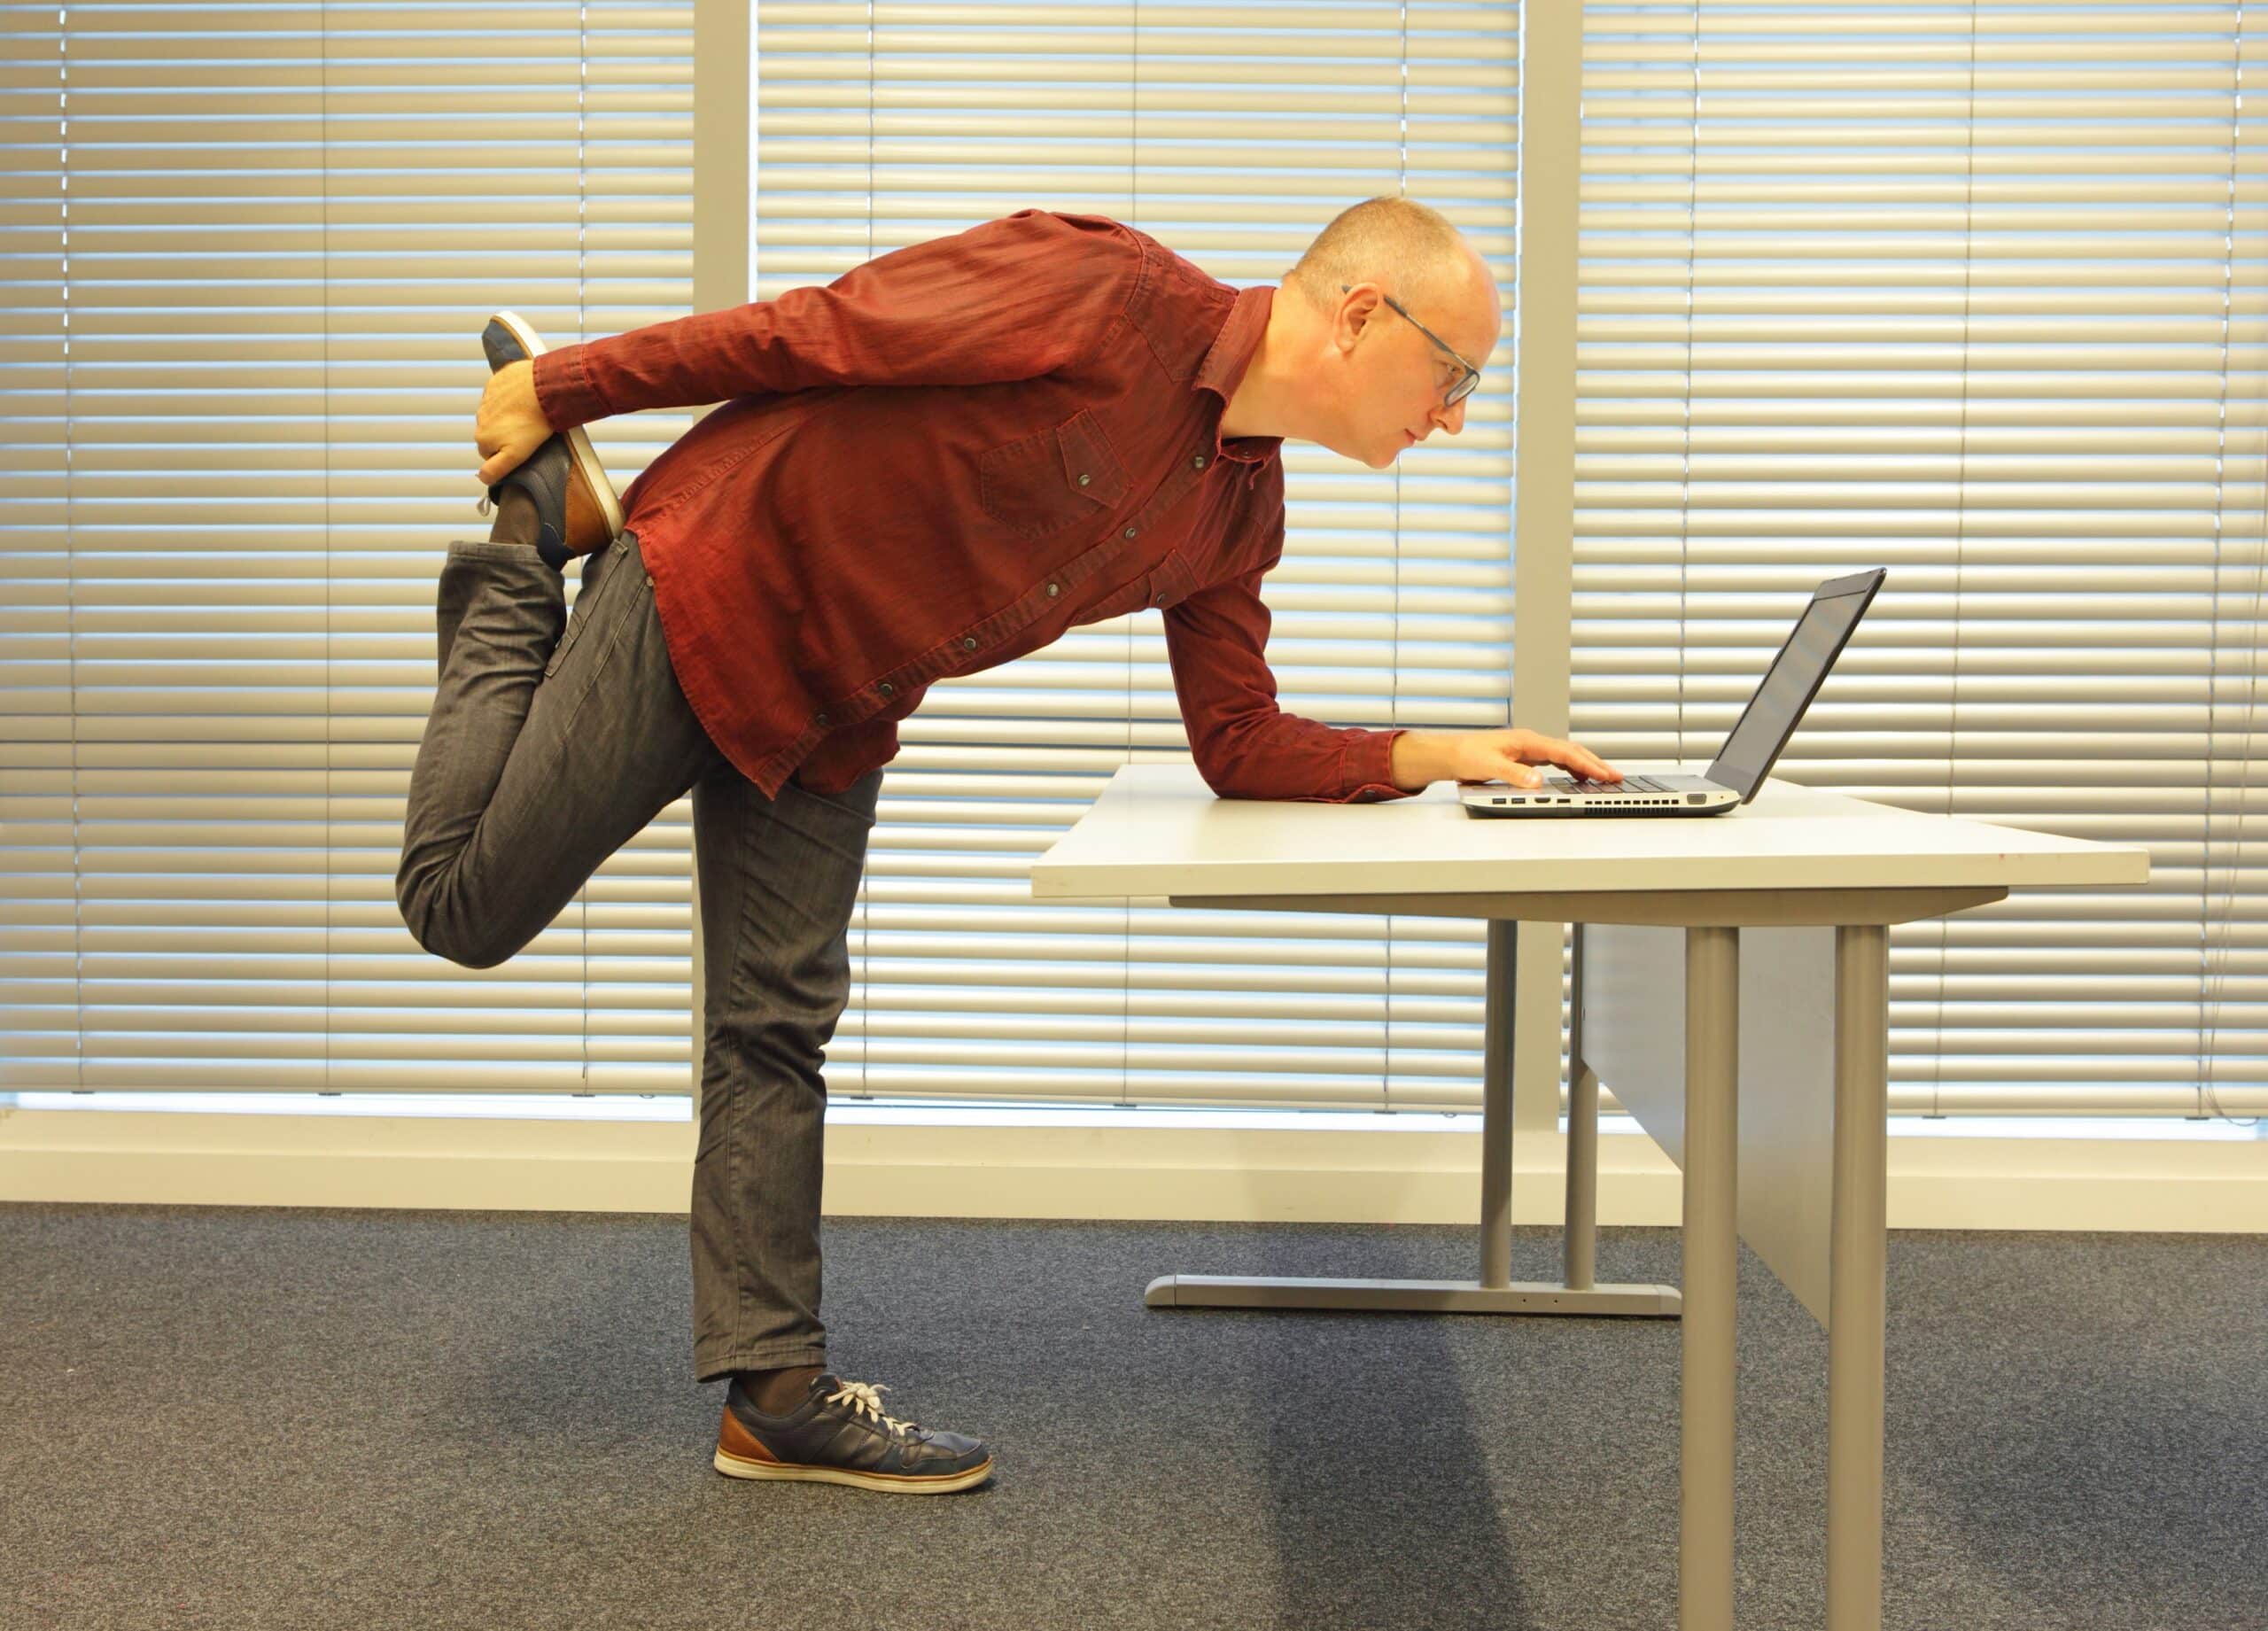 Dangers Of Prolonged Sedentary Occupational Sitting Time